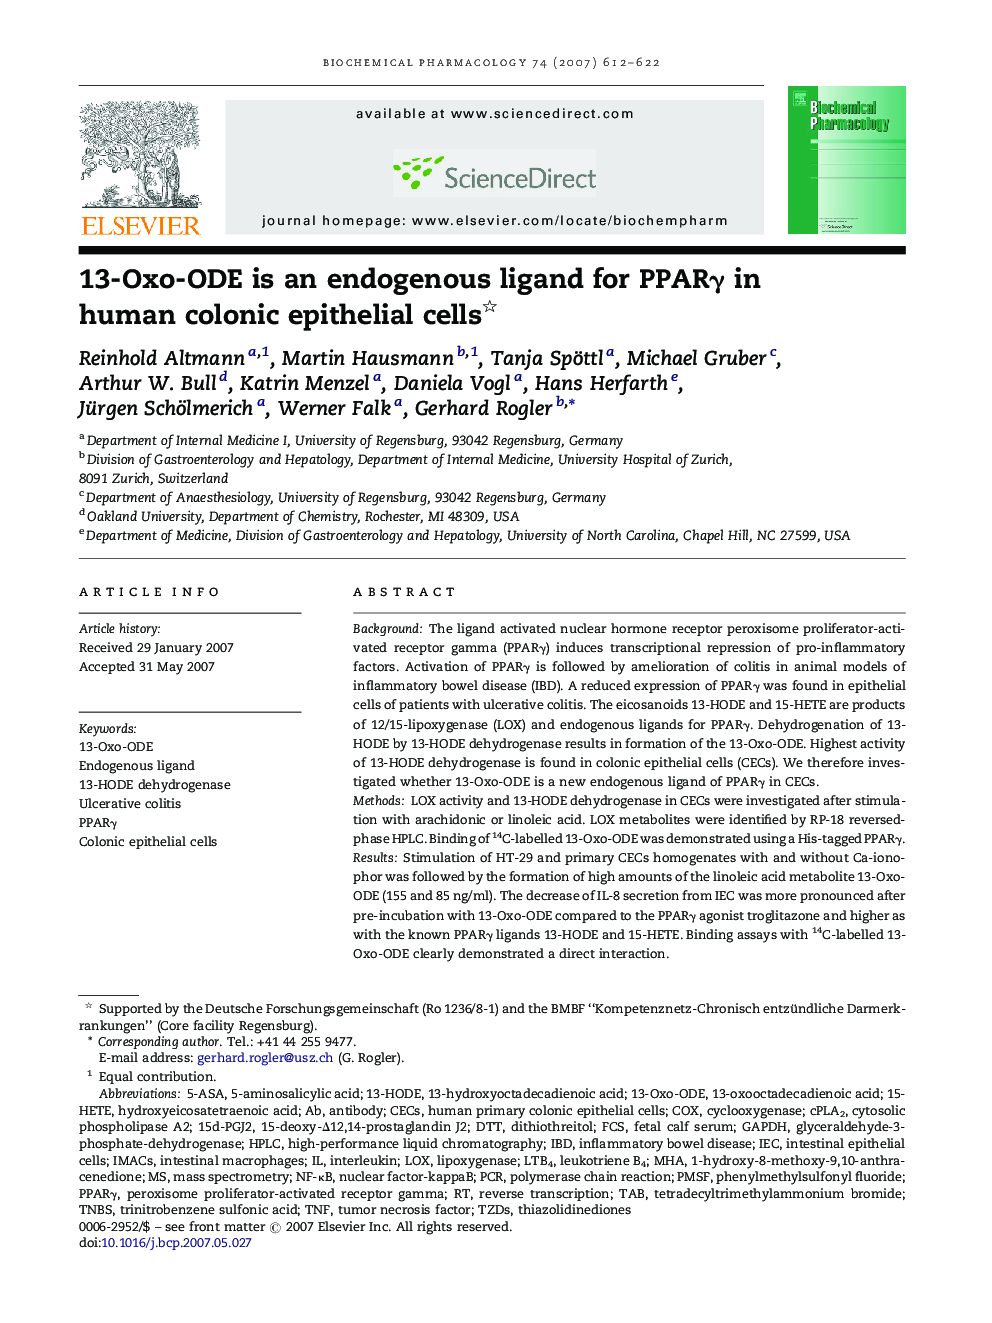 13-Oxo-ODE is an endogenous ligand for PPARγ in human colonic epithelial cells 